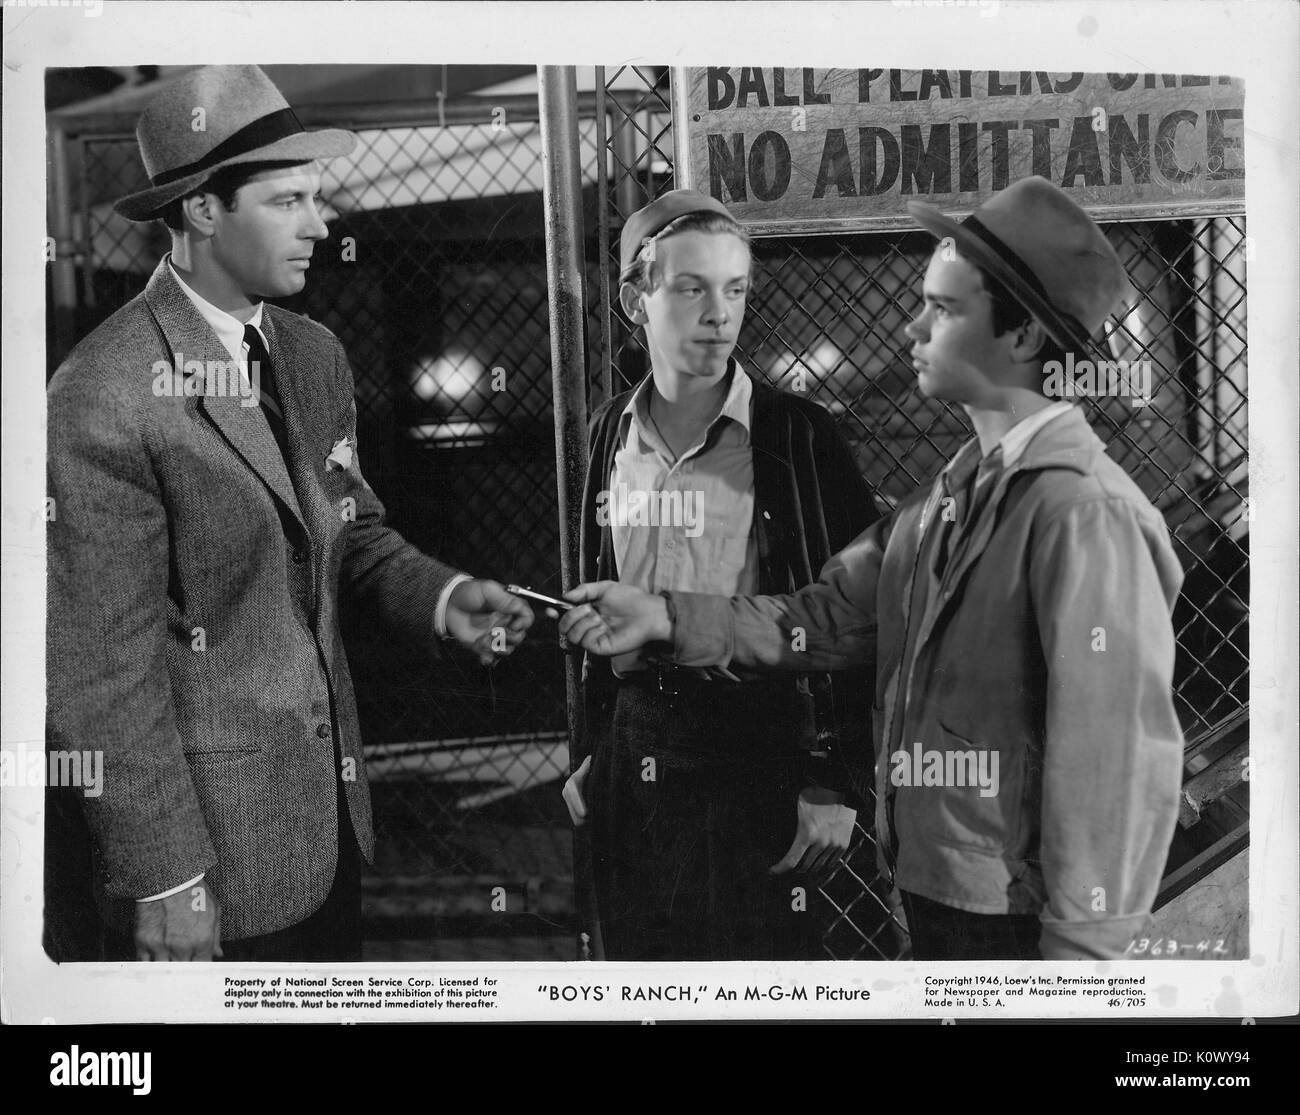 A movie still scene from 'Boys' Ranch' (1946 MGM film), showing two boys and a man outside a fenced area with a 'No Admittance sign, with one of the boy handing over something to the man, 1946. Stock Photo